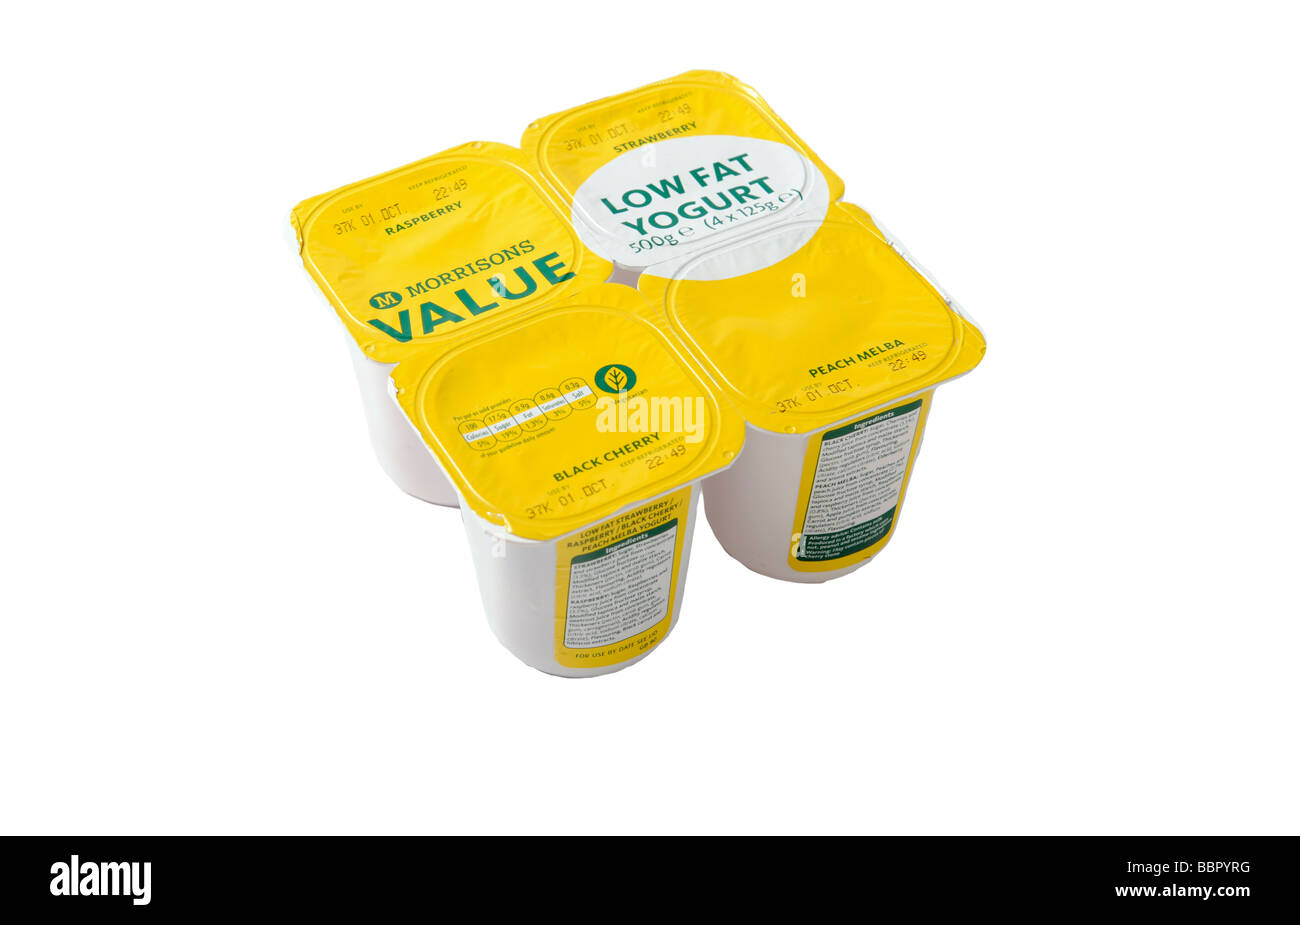 A pack of four budget value low fat yogurt made for Morrisons Supermarket Stock Photo